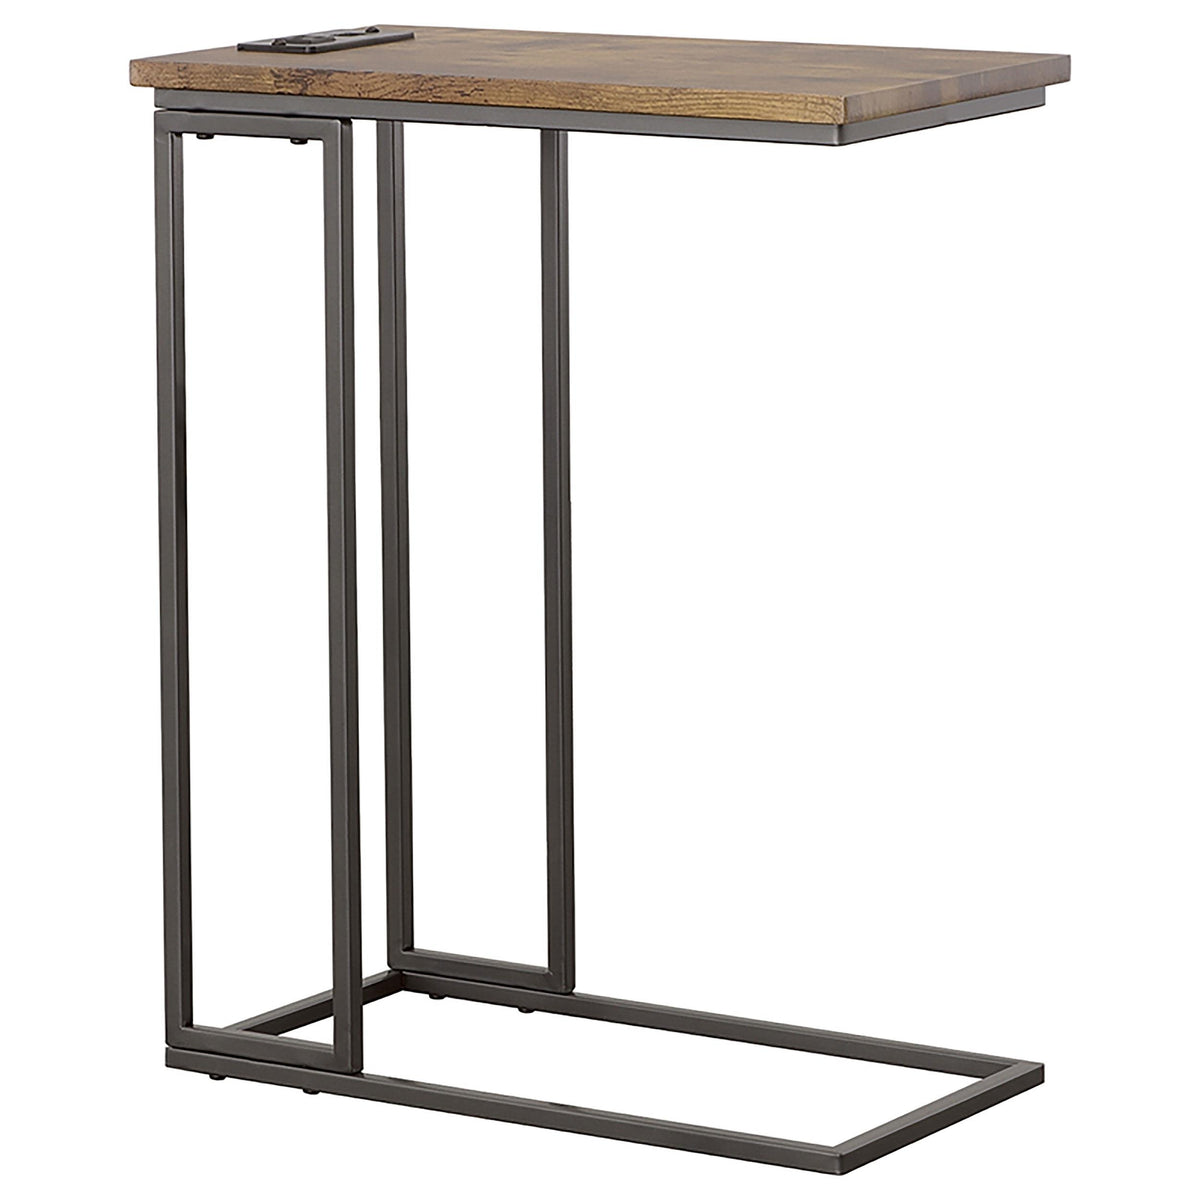 Rudy Snack Table with Power Outlet Gunmetal and Antique Brown Rudy Snack Table with Power Outlet Gunmetal and Antique Brown Half Price Furniture